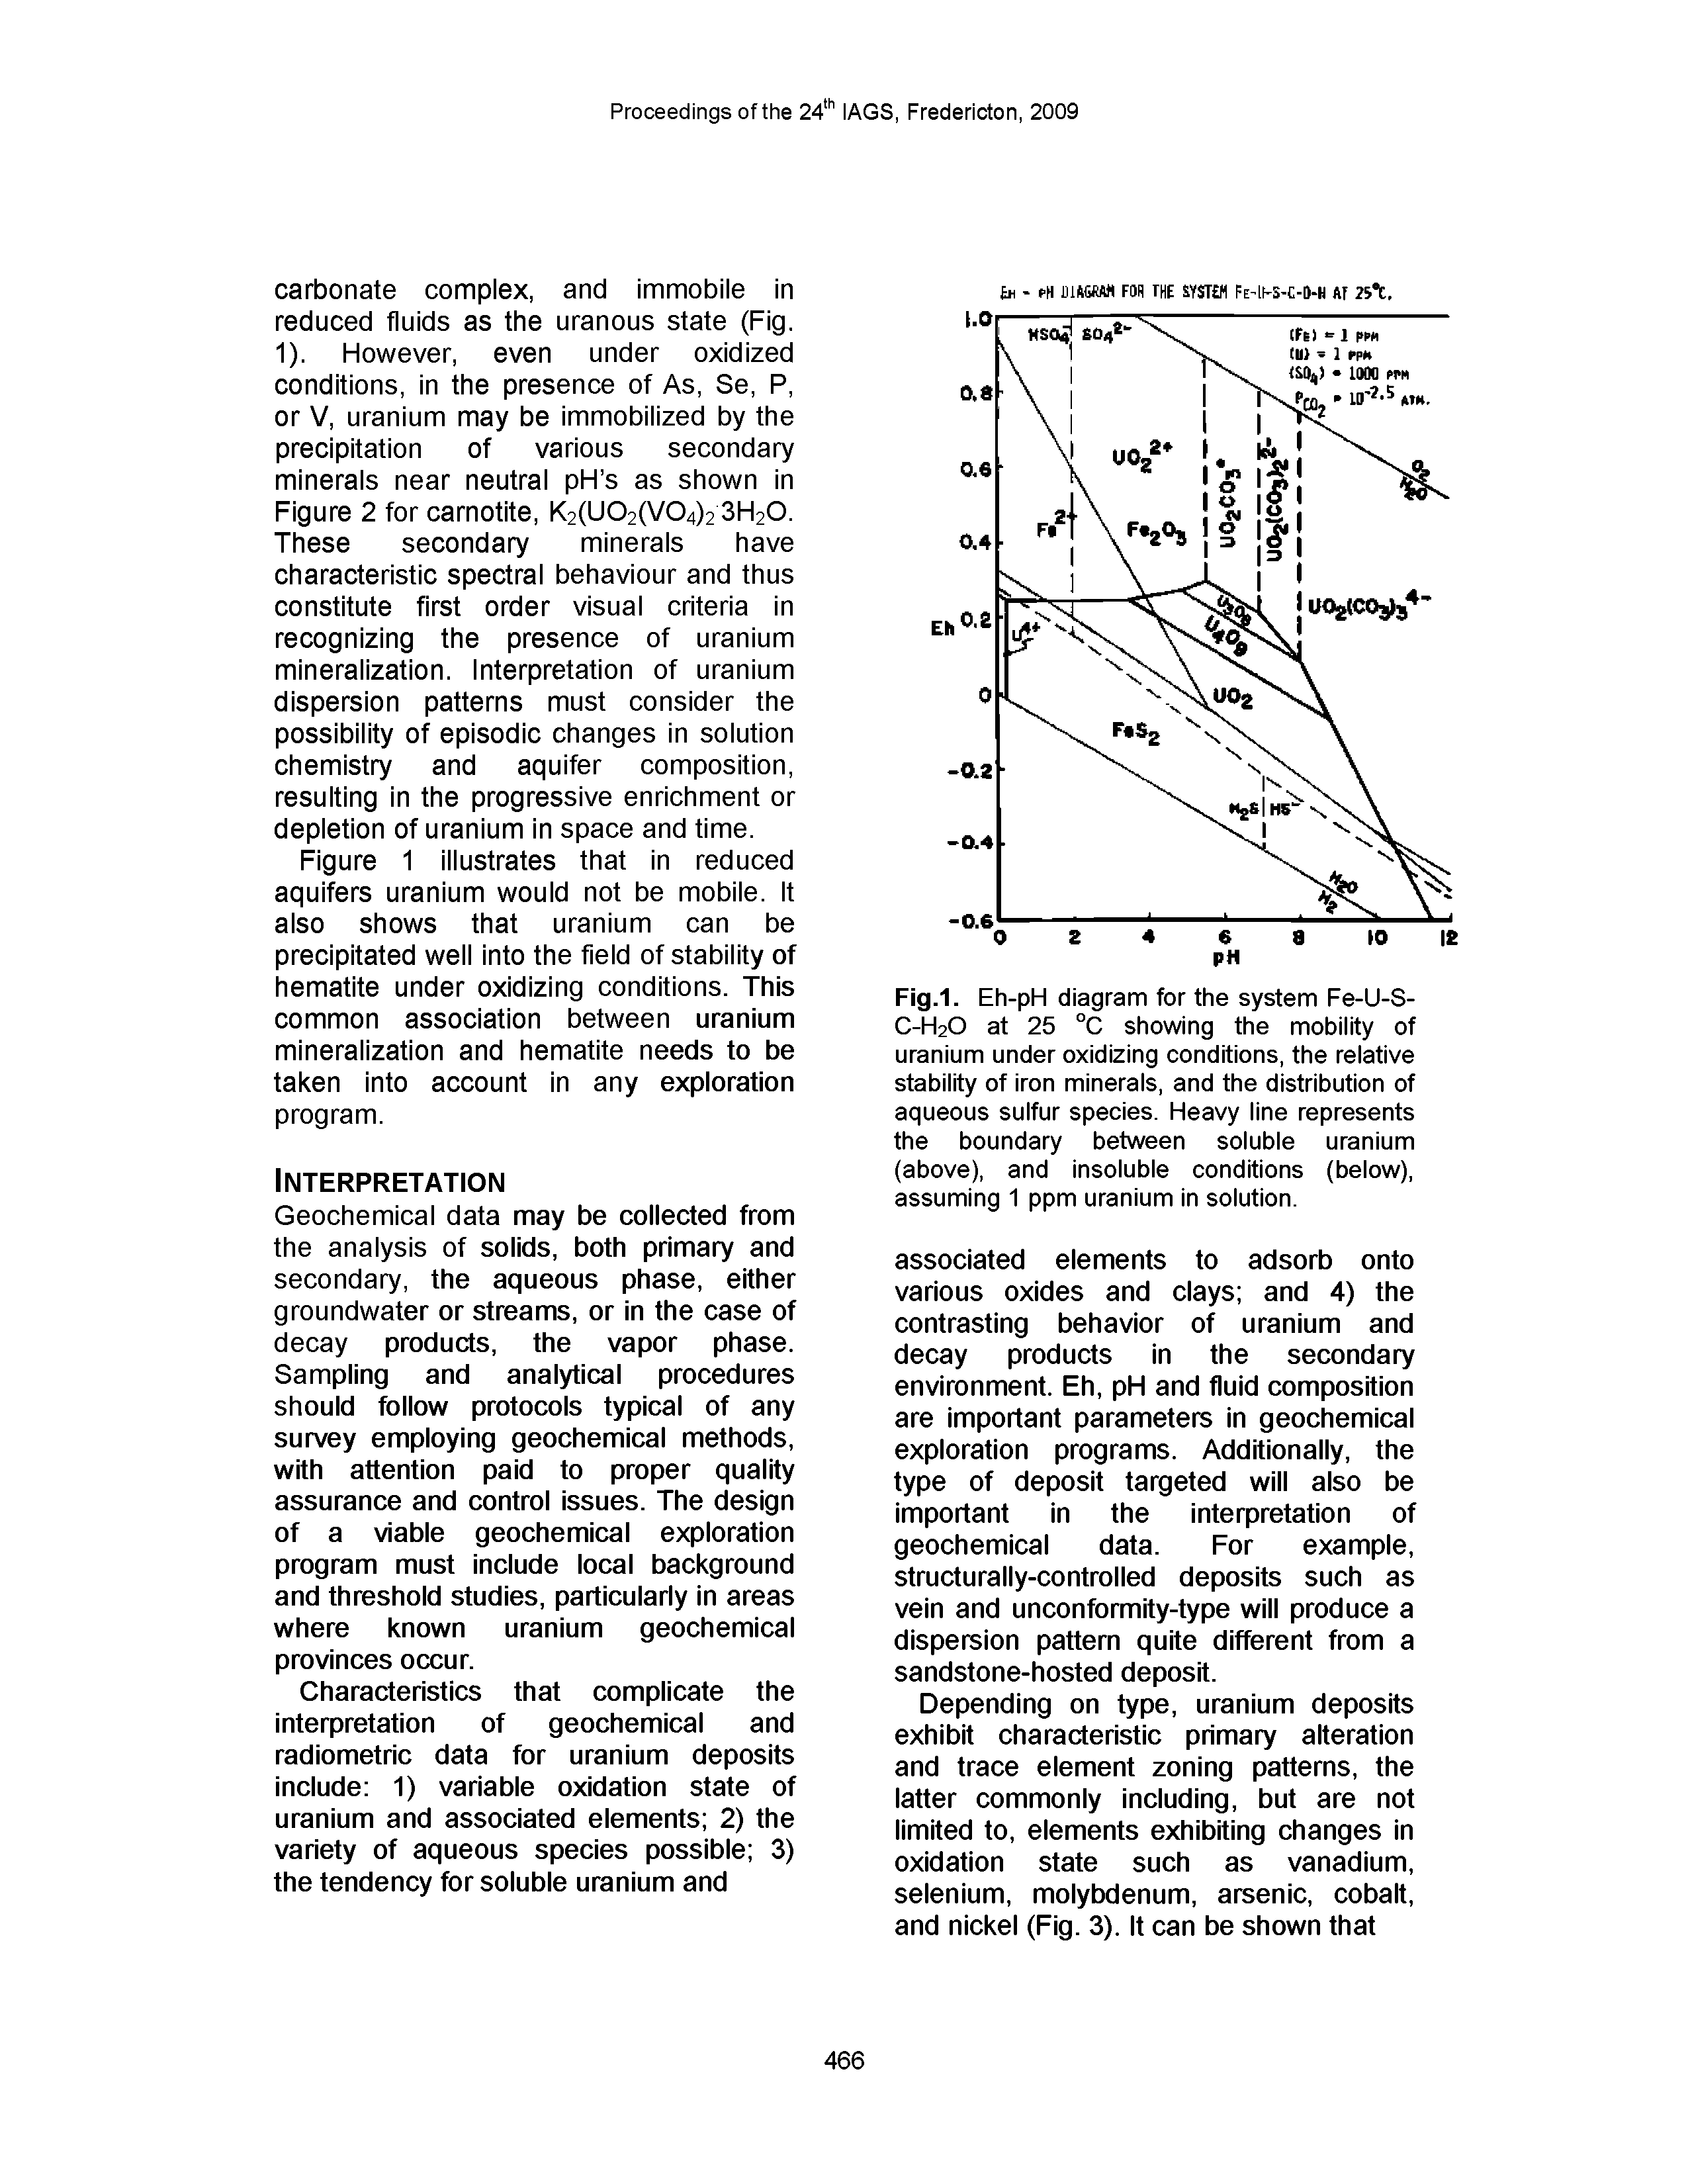 Fig.1. Eh-pH diagram for the system Fe-U-S-C-H2O at 25 °C showing the mobility of uranium under oxidizing conditions, the relative stability of iron minerals, and the distribution of aqueous sulfur species. Heavy line represents the boundary between soluble uranium (above), and insoluble conditions (below), assuming 1 ppm uranium in solution.